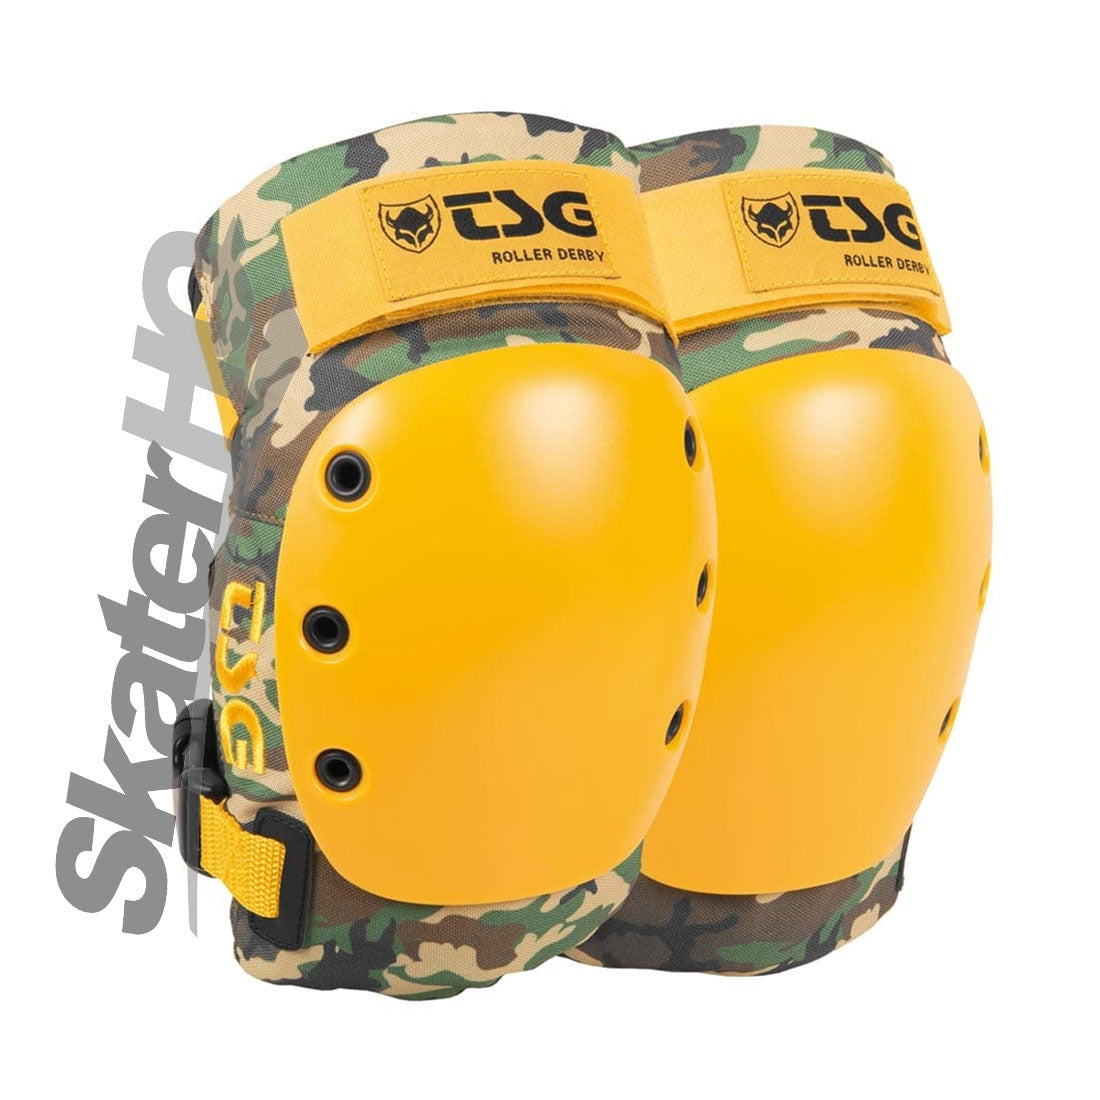 TSG Rollerderby Knee 2.0 Camo - Large Protective Gear